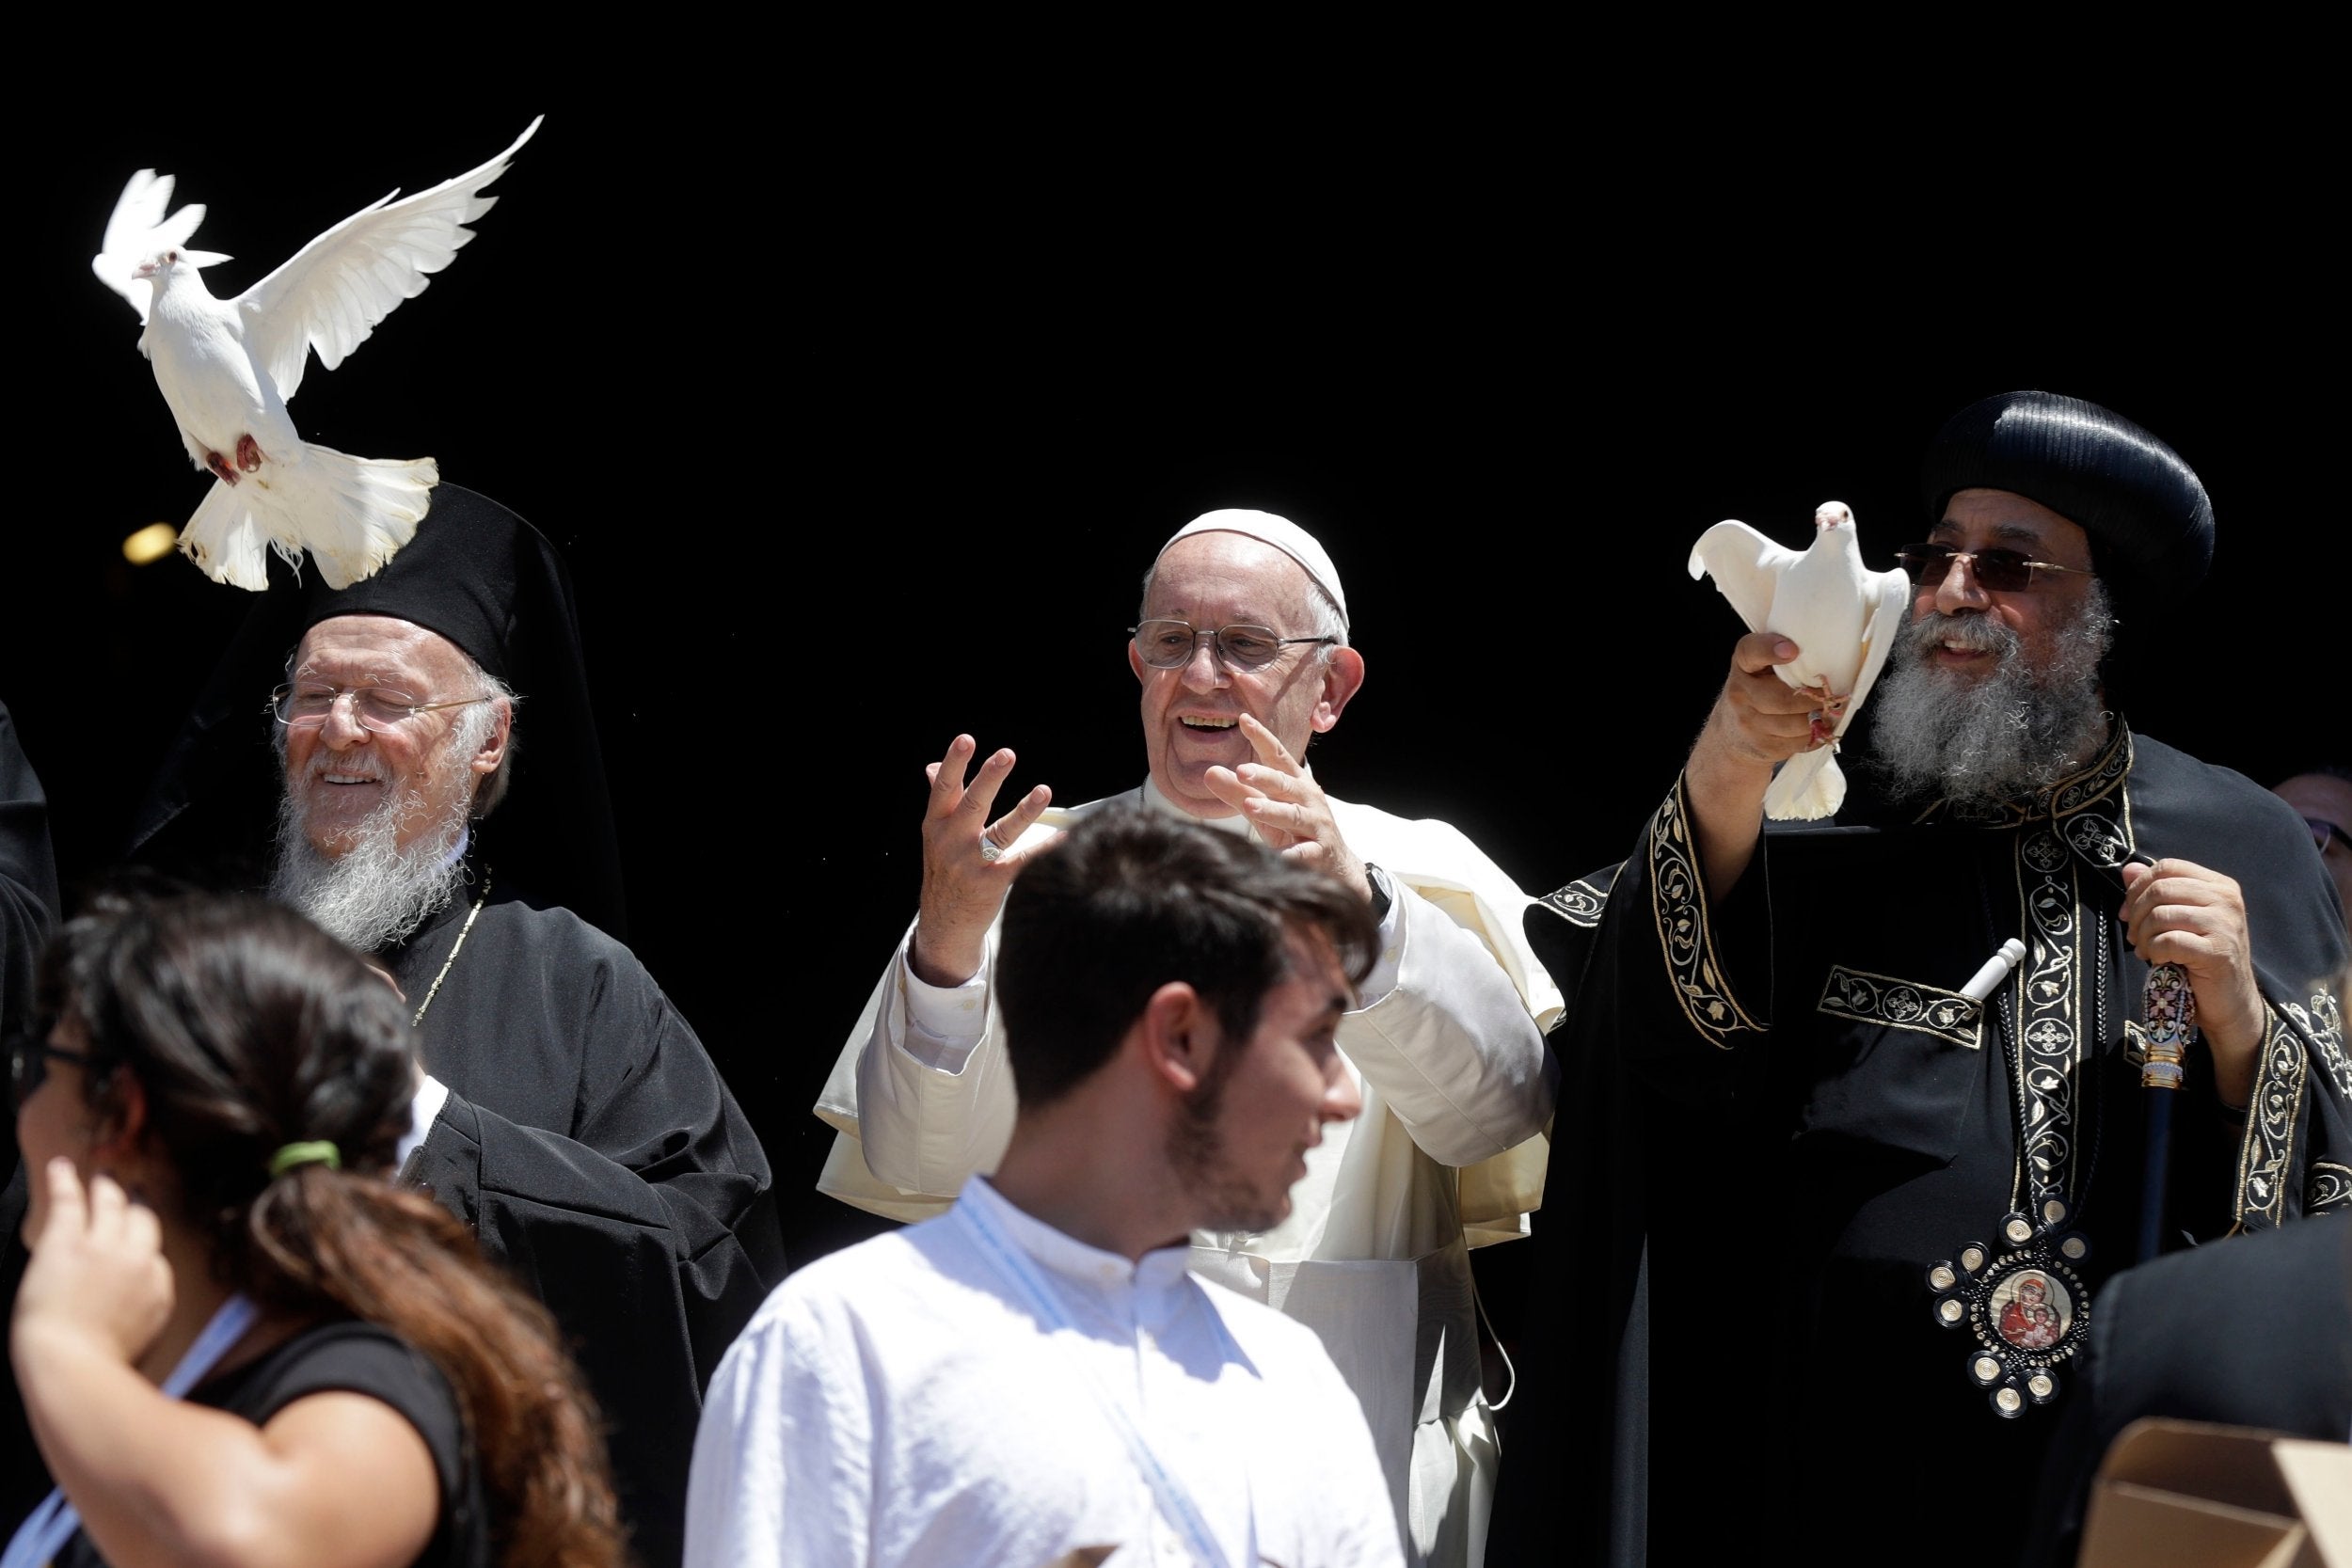 Pope Francis, center, flanked by Ecumenical Patriarch Bartholomew I, left, and Tawadros II, Pope of Alexandria and Patriarch of the See of St. Mark, free doves in Bari